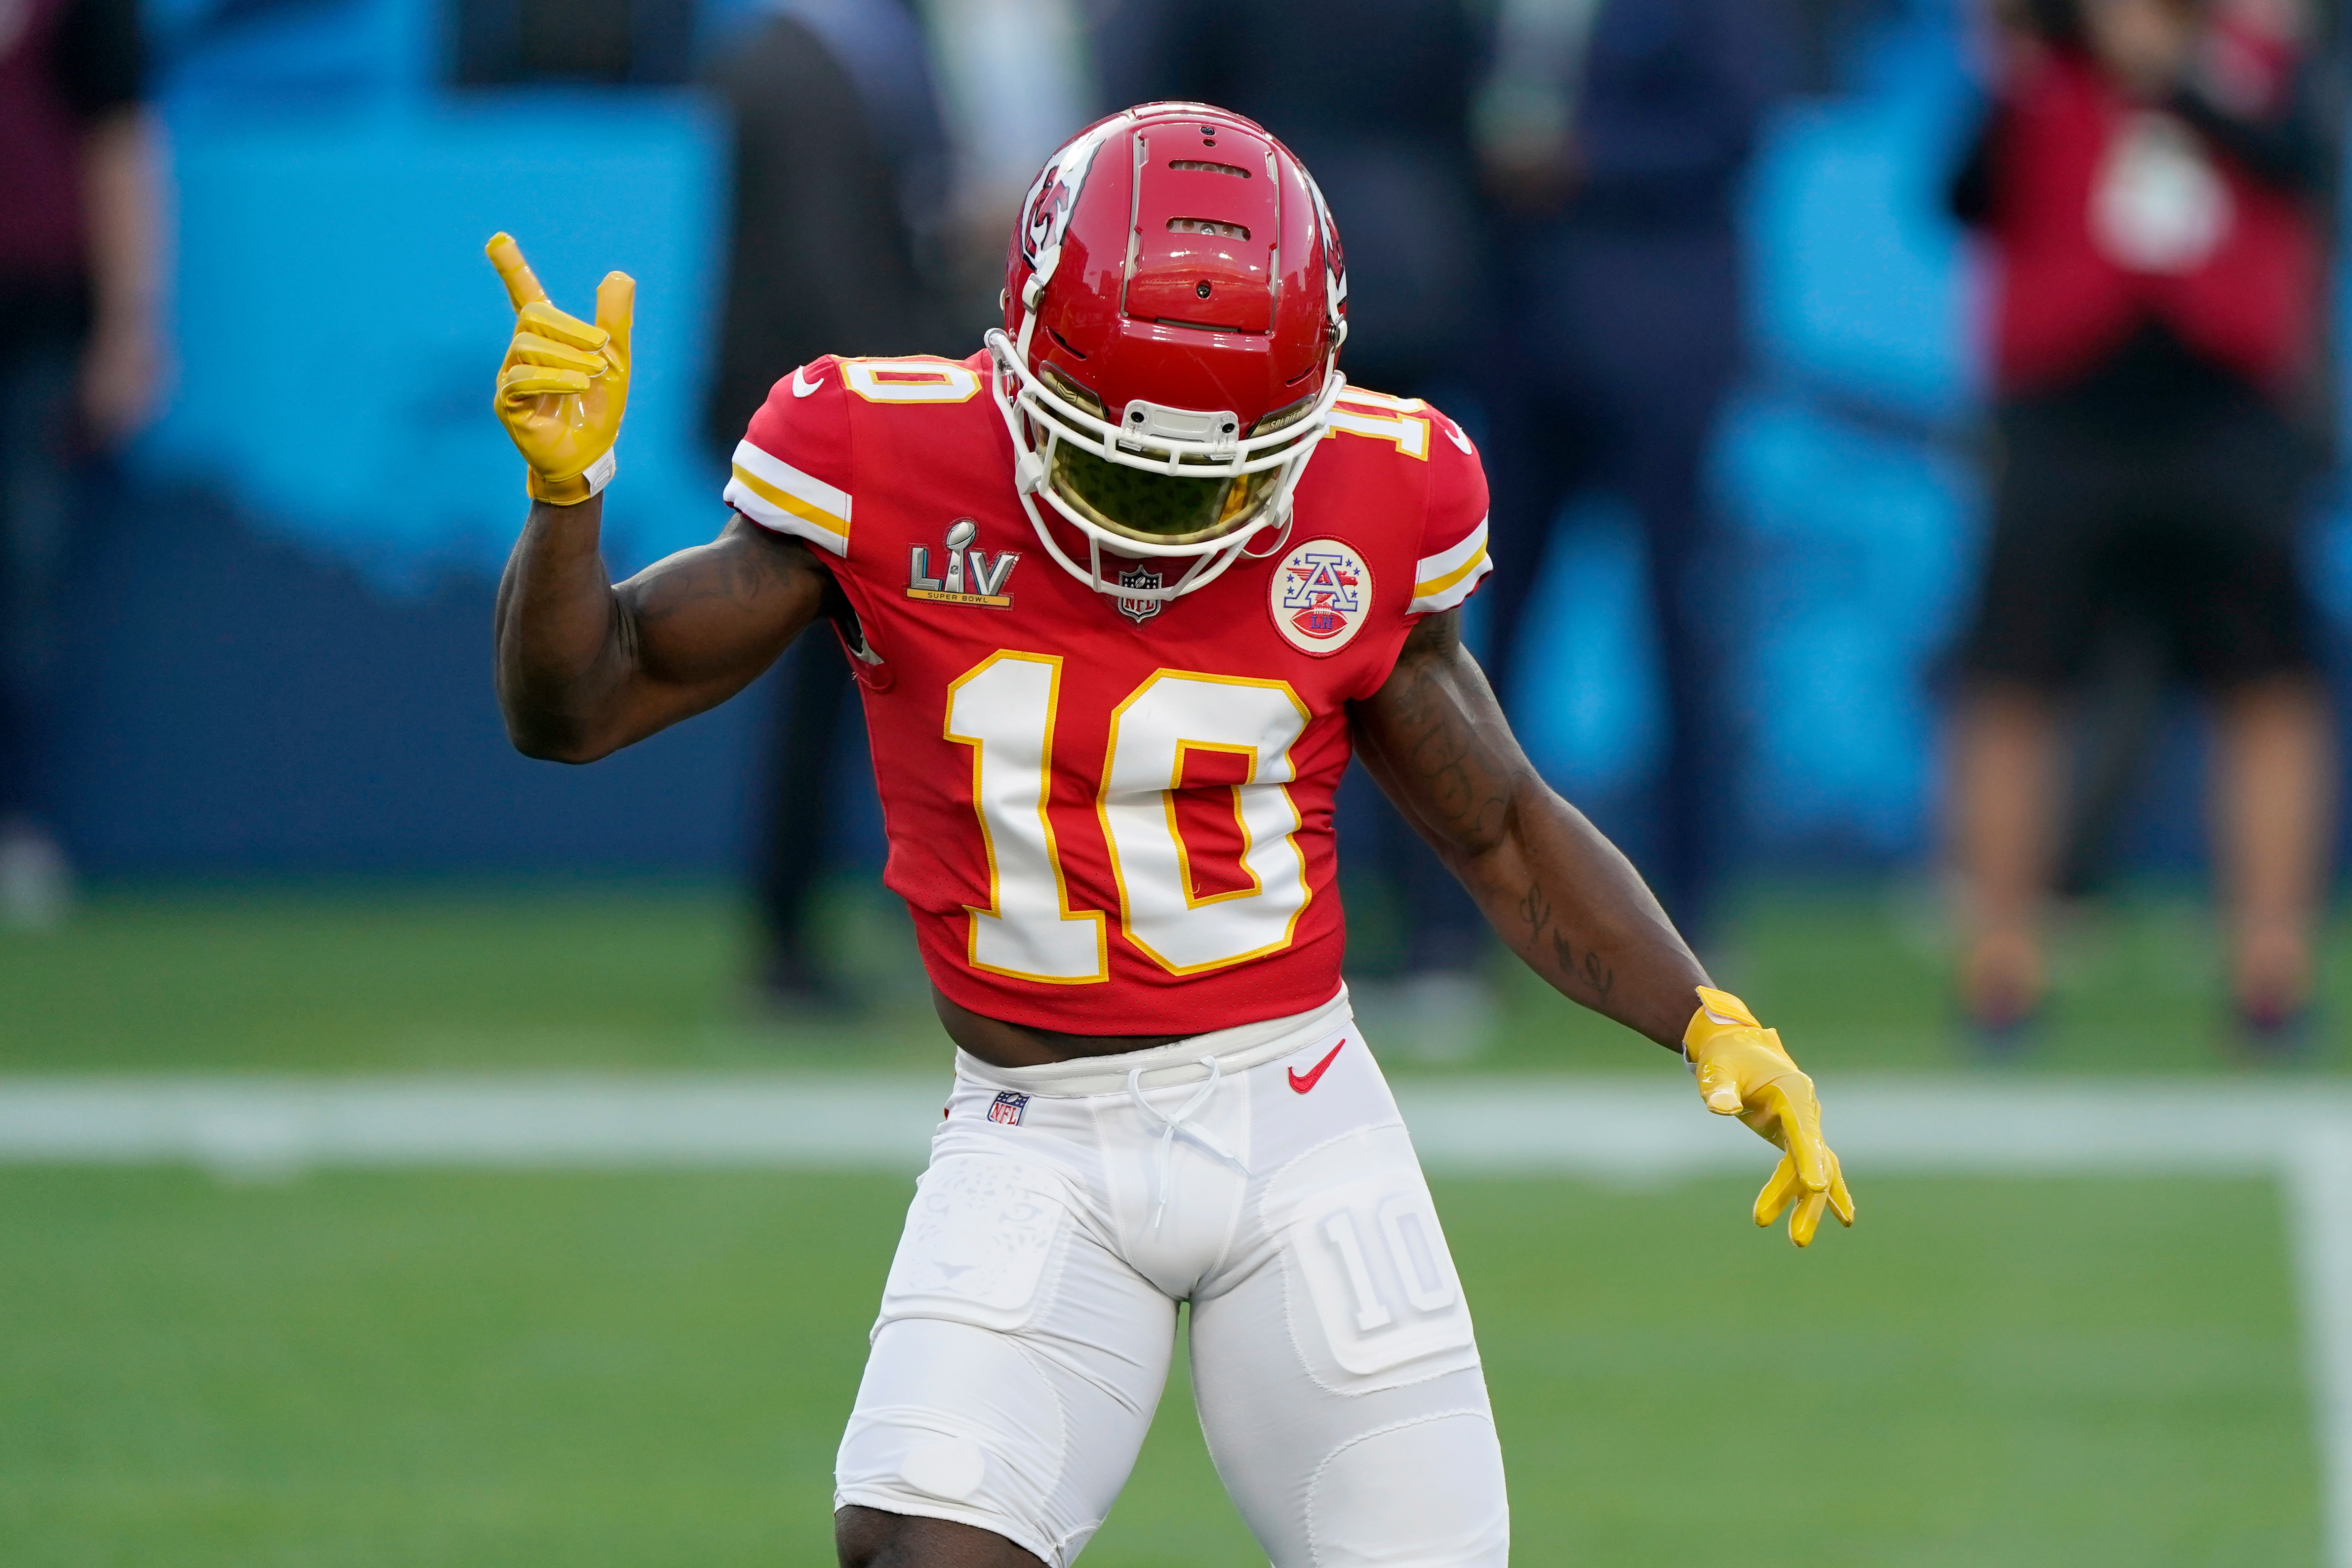 Tyreek Hill is the fastest player in Madden NFL 22